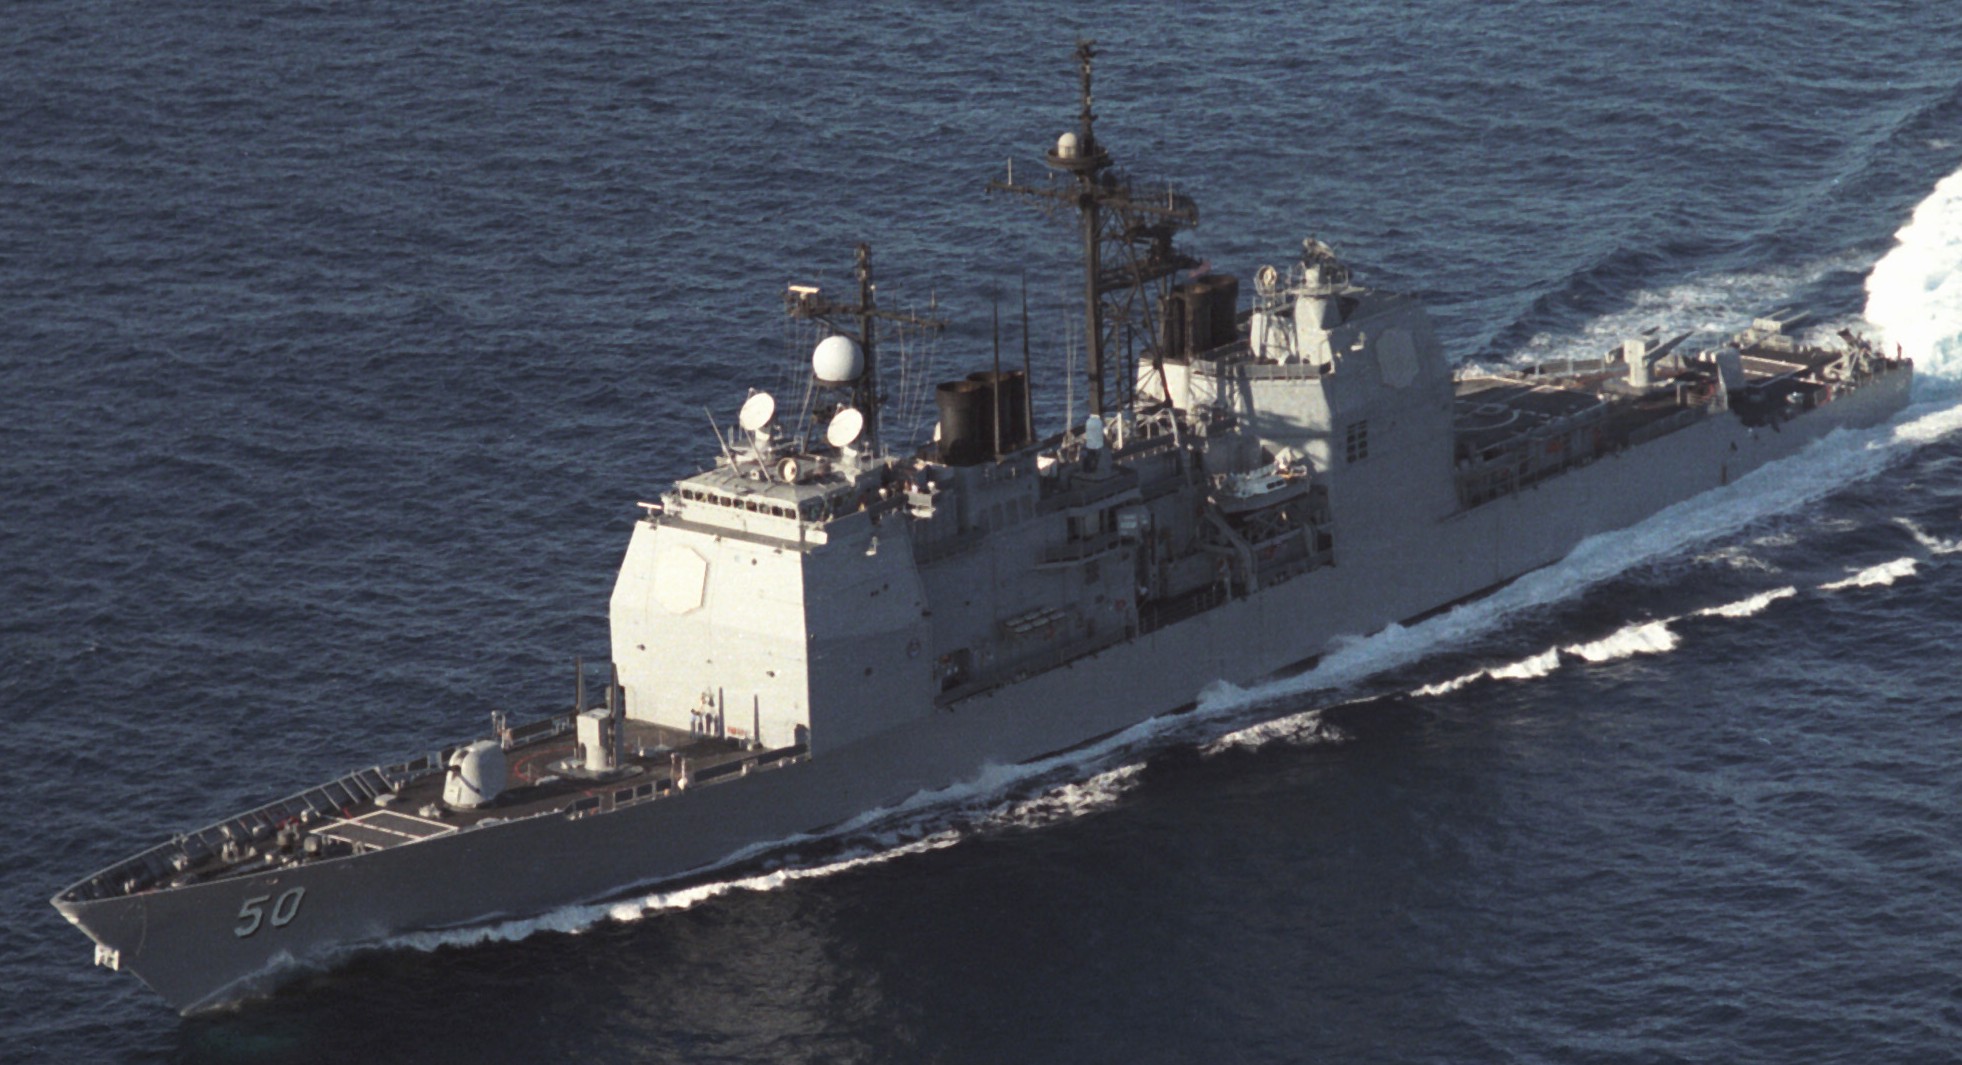 cg-50 uss valley forge ticonderoga class guided missile cruiser aegis us navy 27